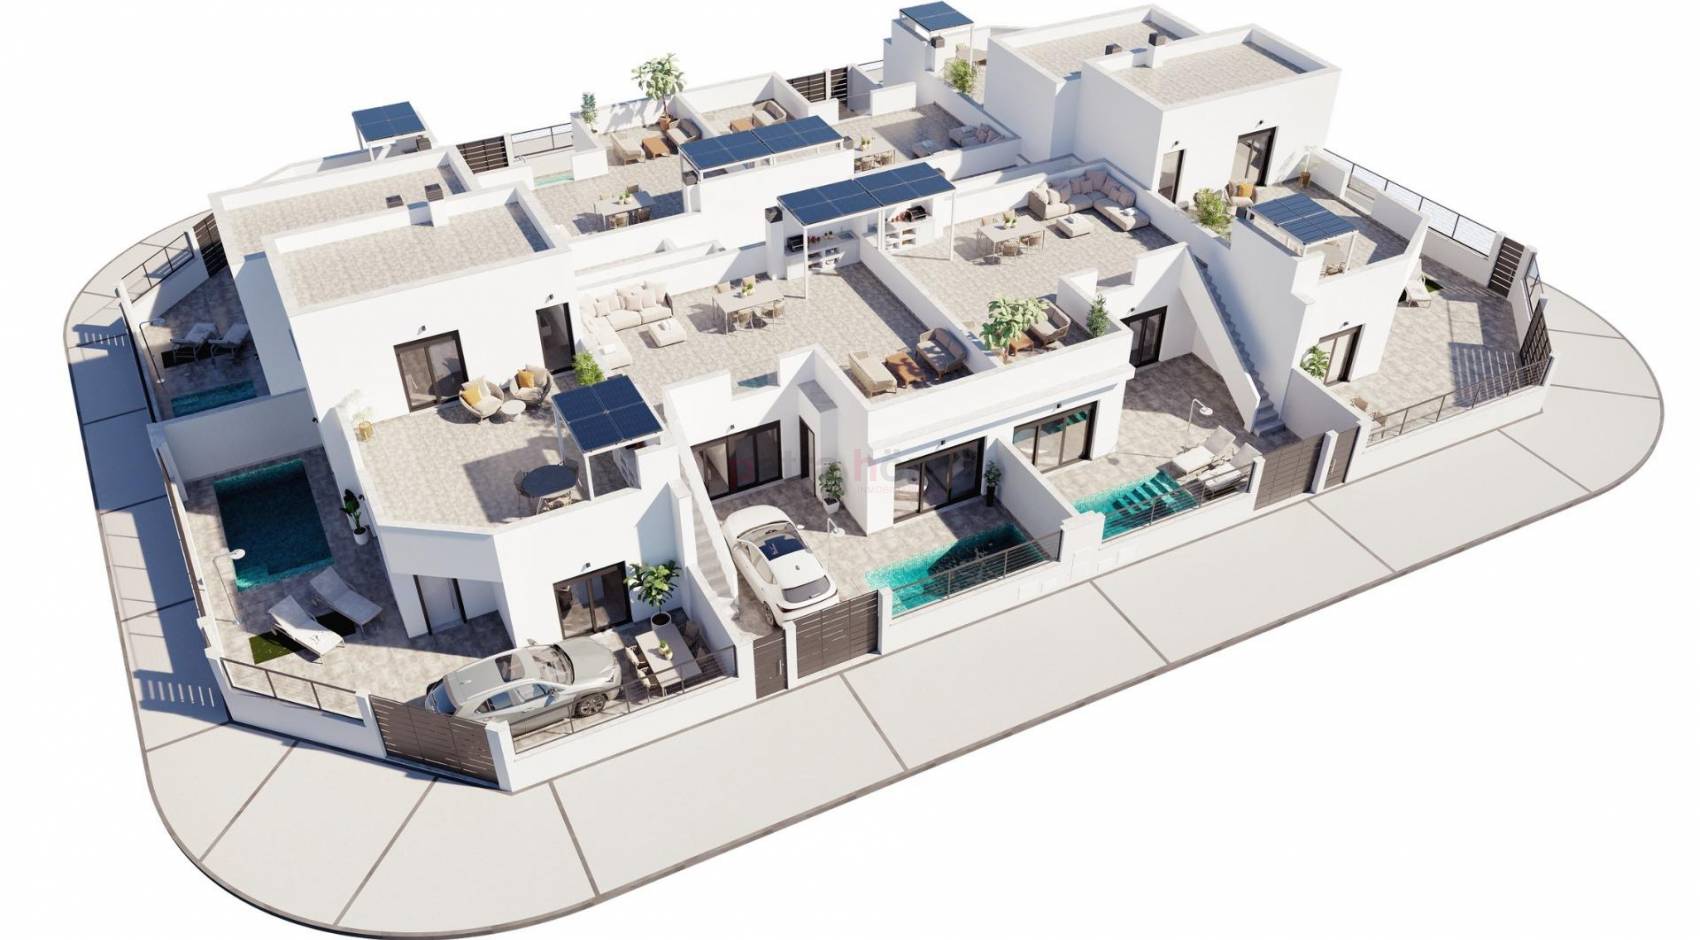 nieuw - Townhouse - Other areas - Torre-pacheco